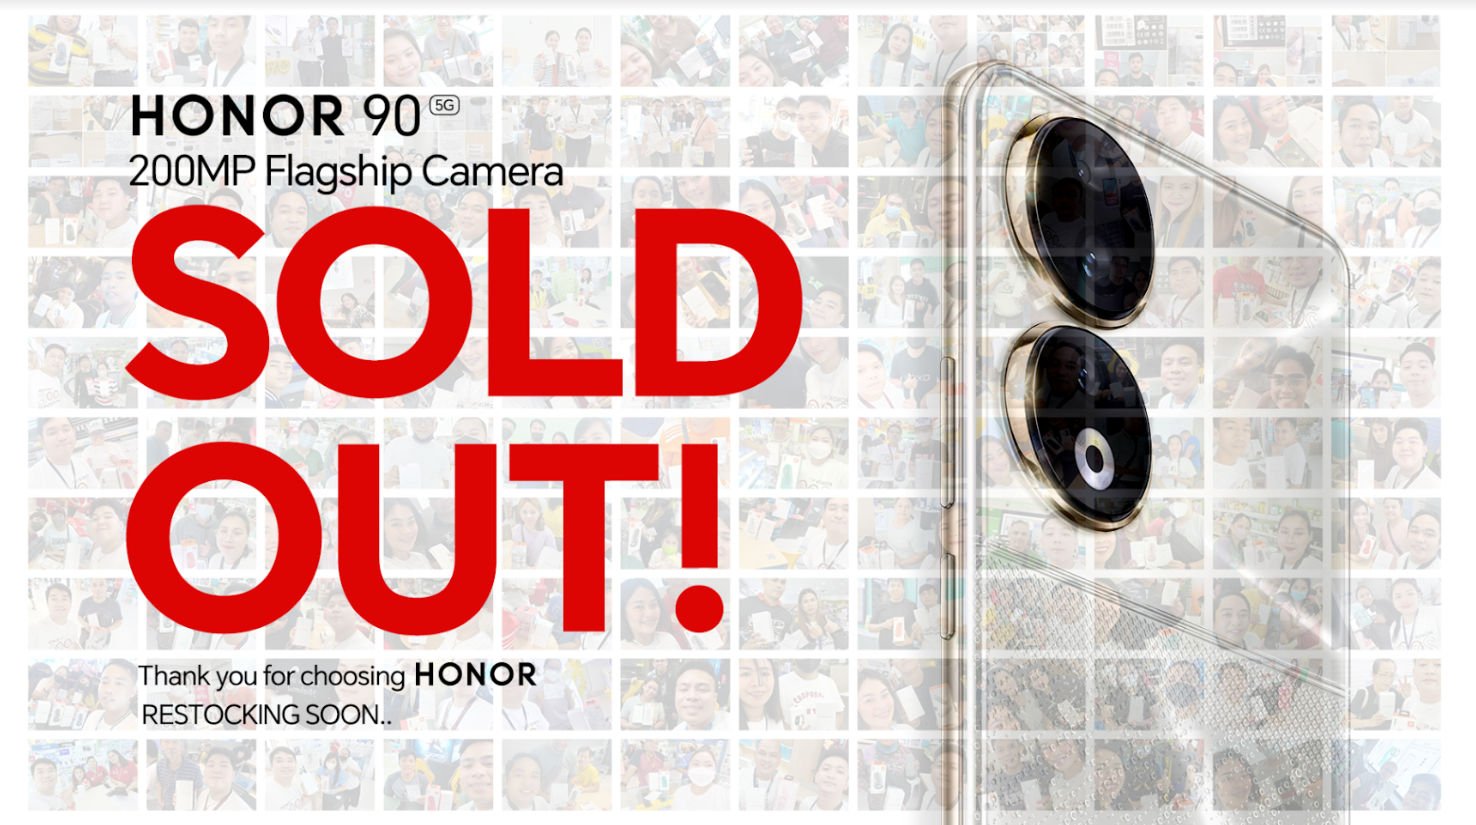 HONOR is unstoppable! After the first-day sale announcement last Aug 26, in just four days, the revolutionary premium phone HONOR 90 5G is now sold out and will restock soon.